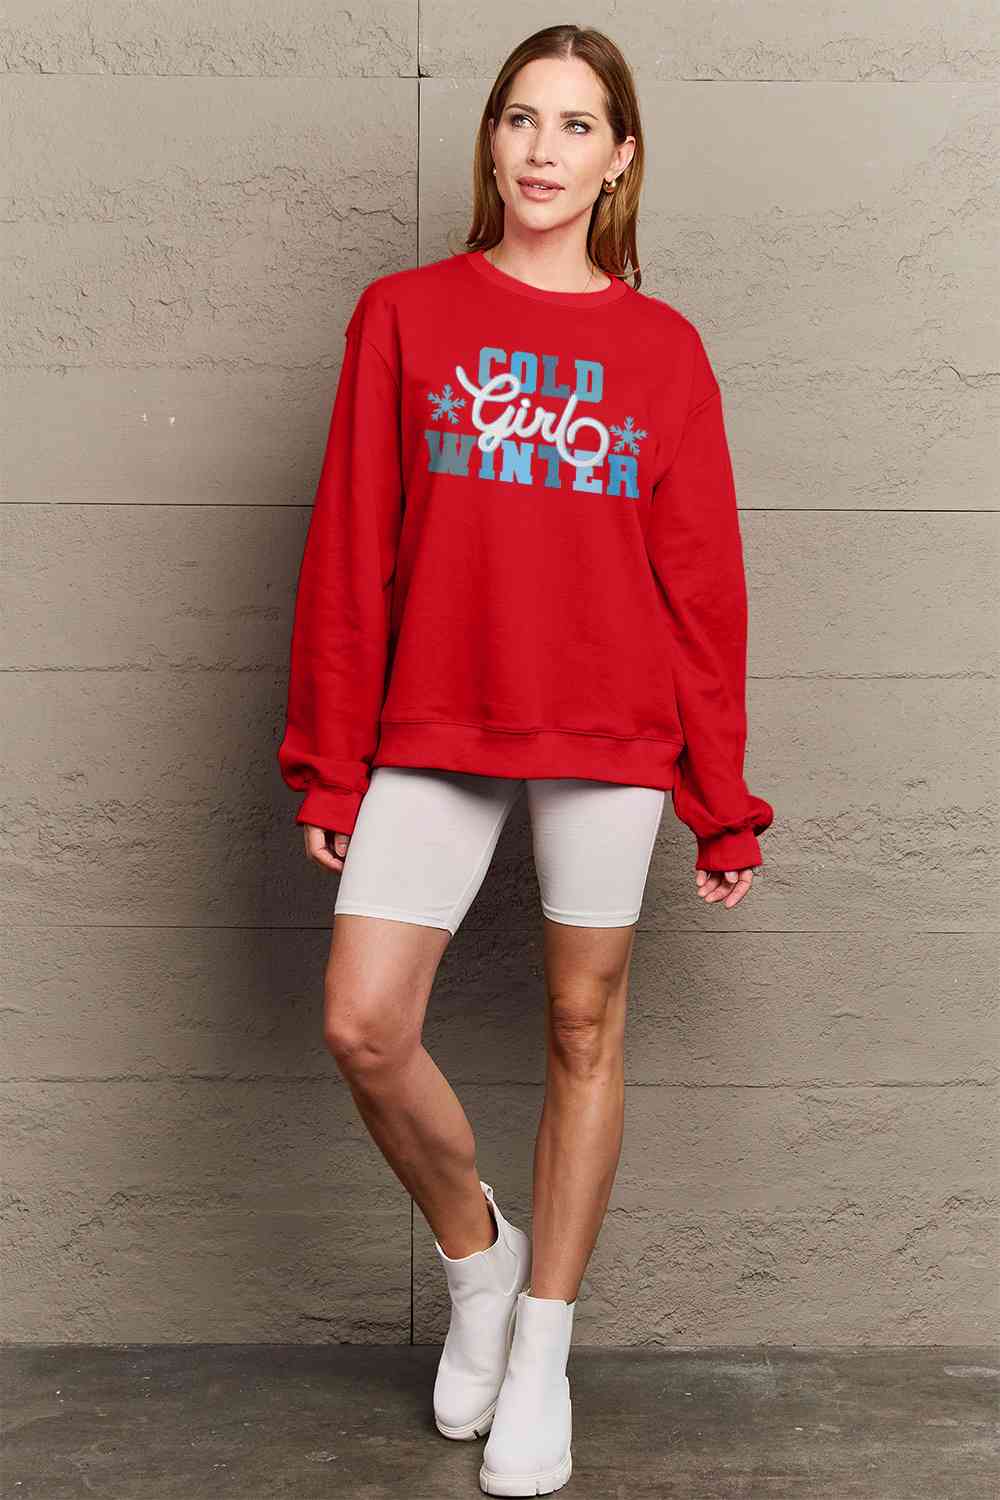 Simply Love Full Size COLD WINTER Graphic Long Sleeve Sweatshirt